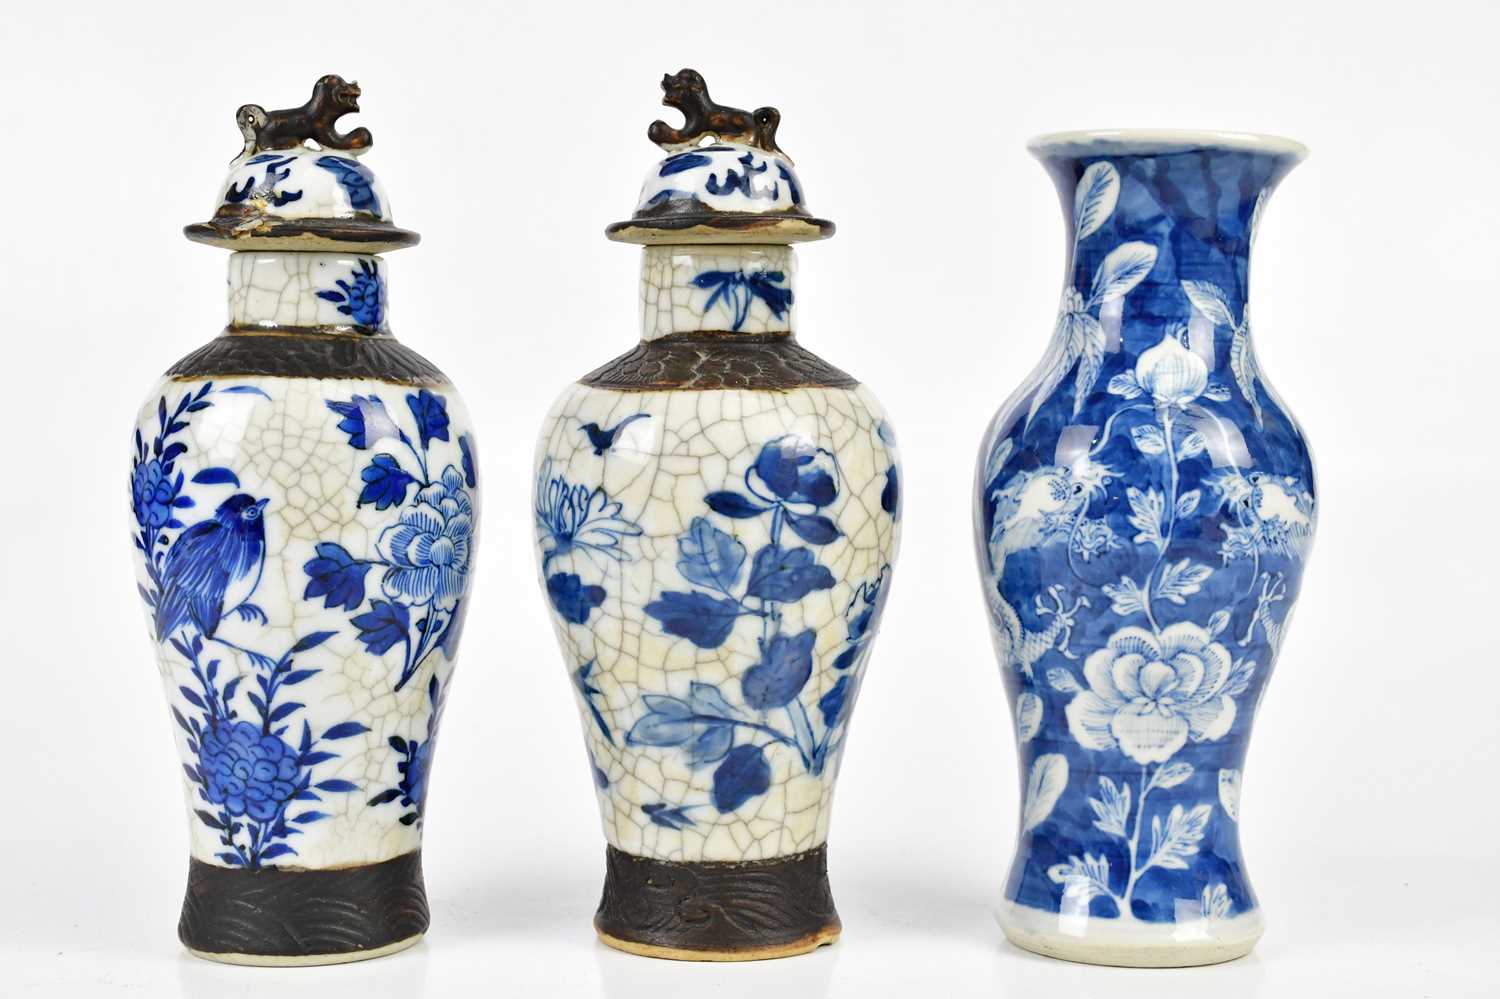 An early 20th century Chinese blue and white vase decorated with a four claw dragon, bears character